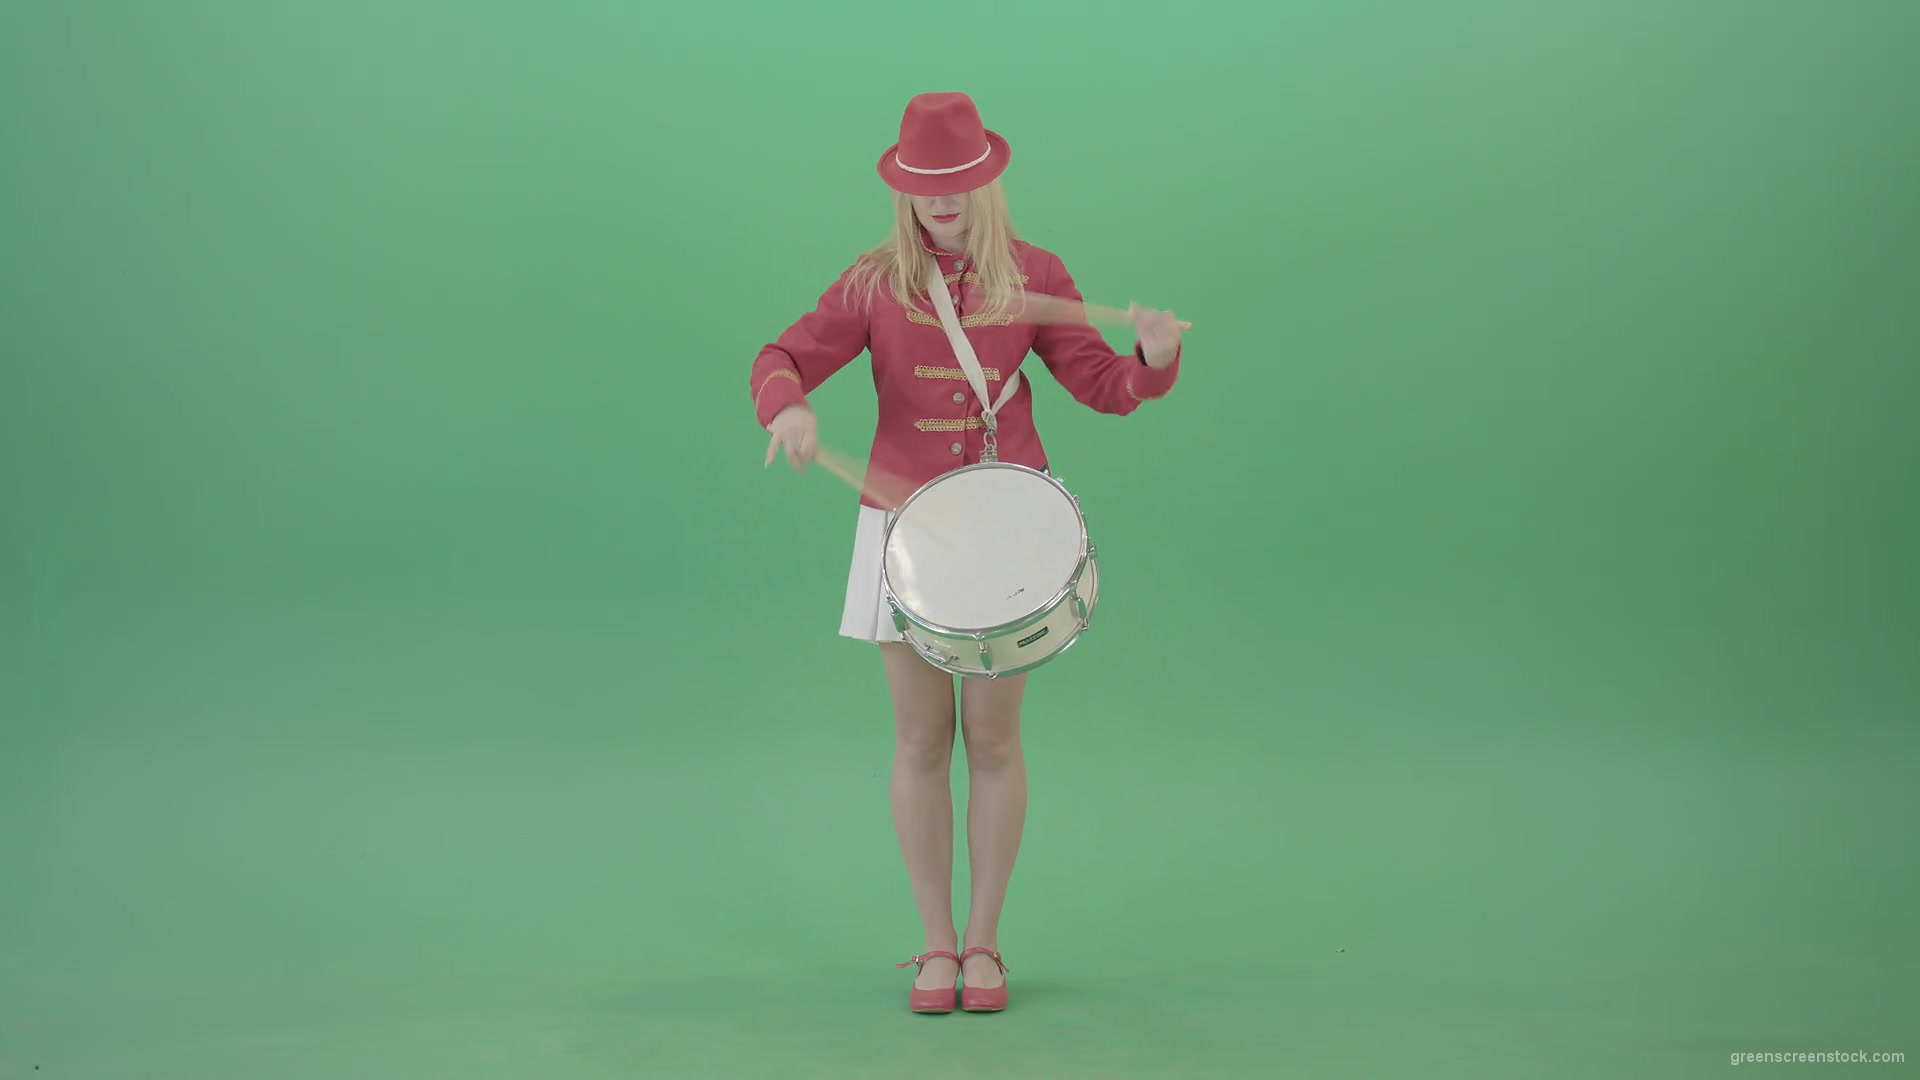 Blonde-woman-in-military-celebration-uniform-play-snare-drum-isolated-on-green-screen-4K-Video-footage-1920_002 Green Screen Stock